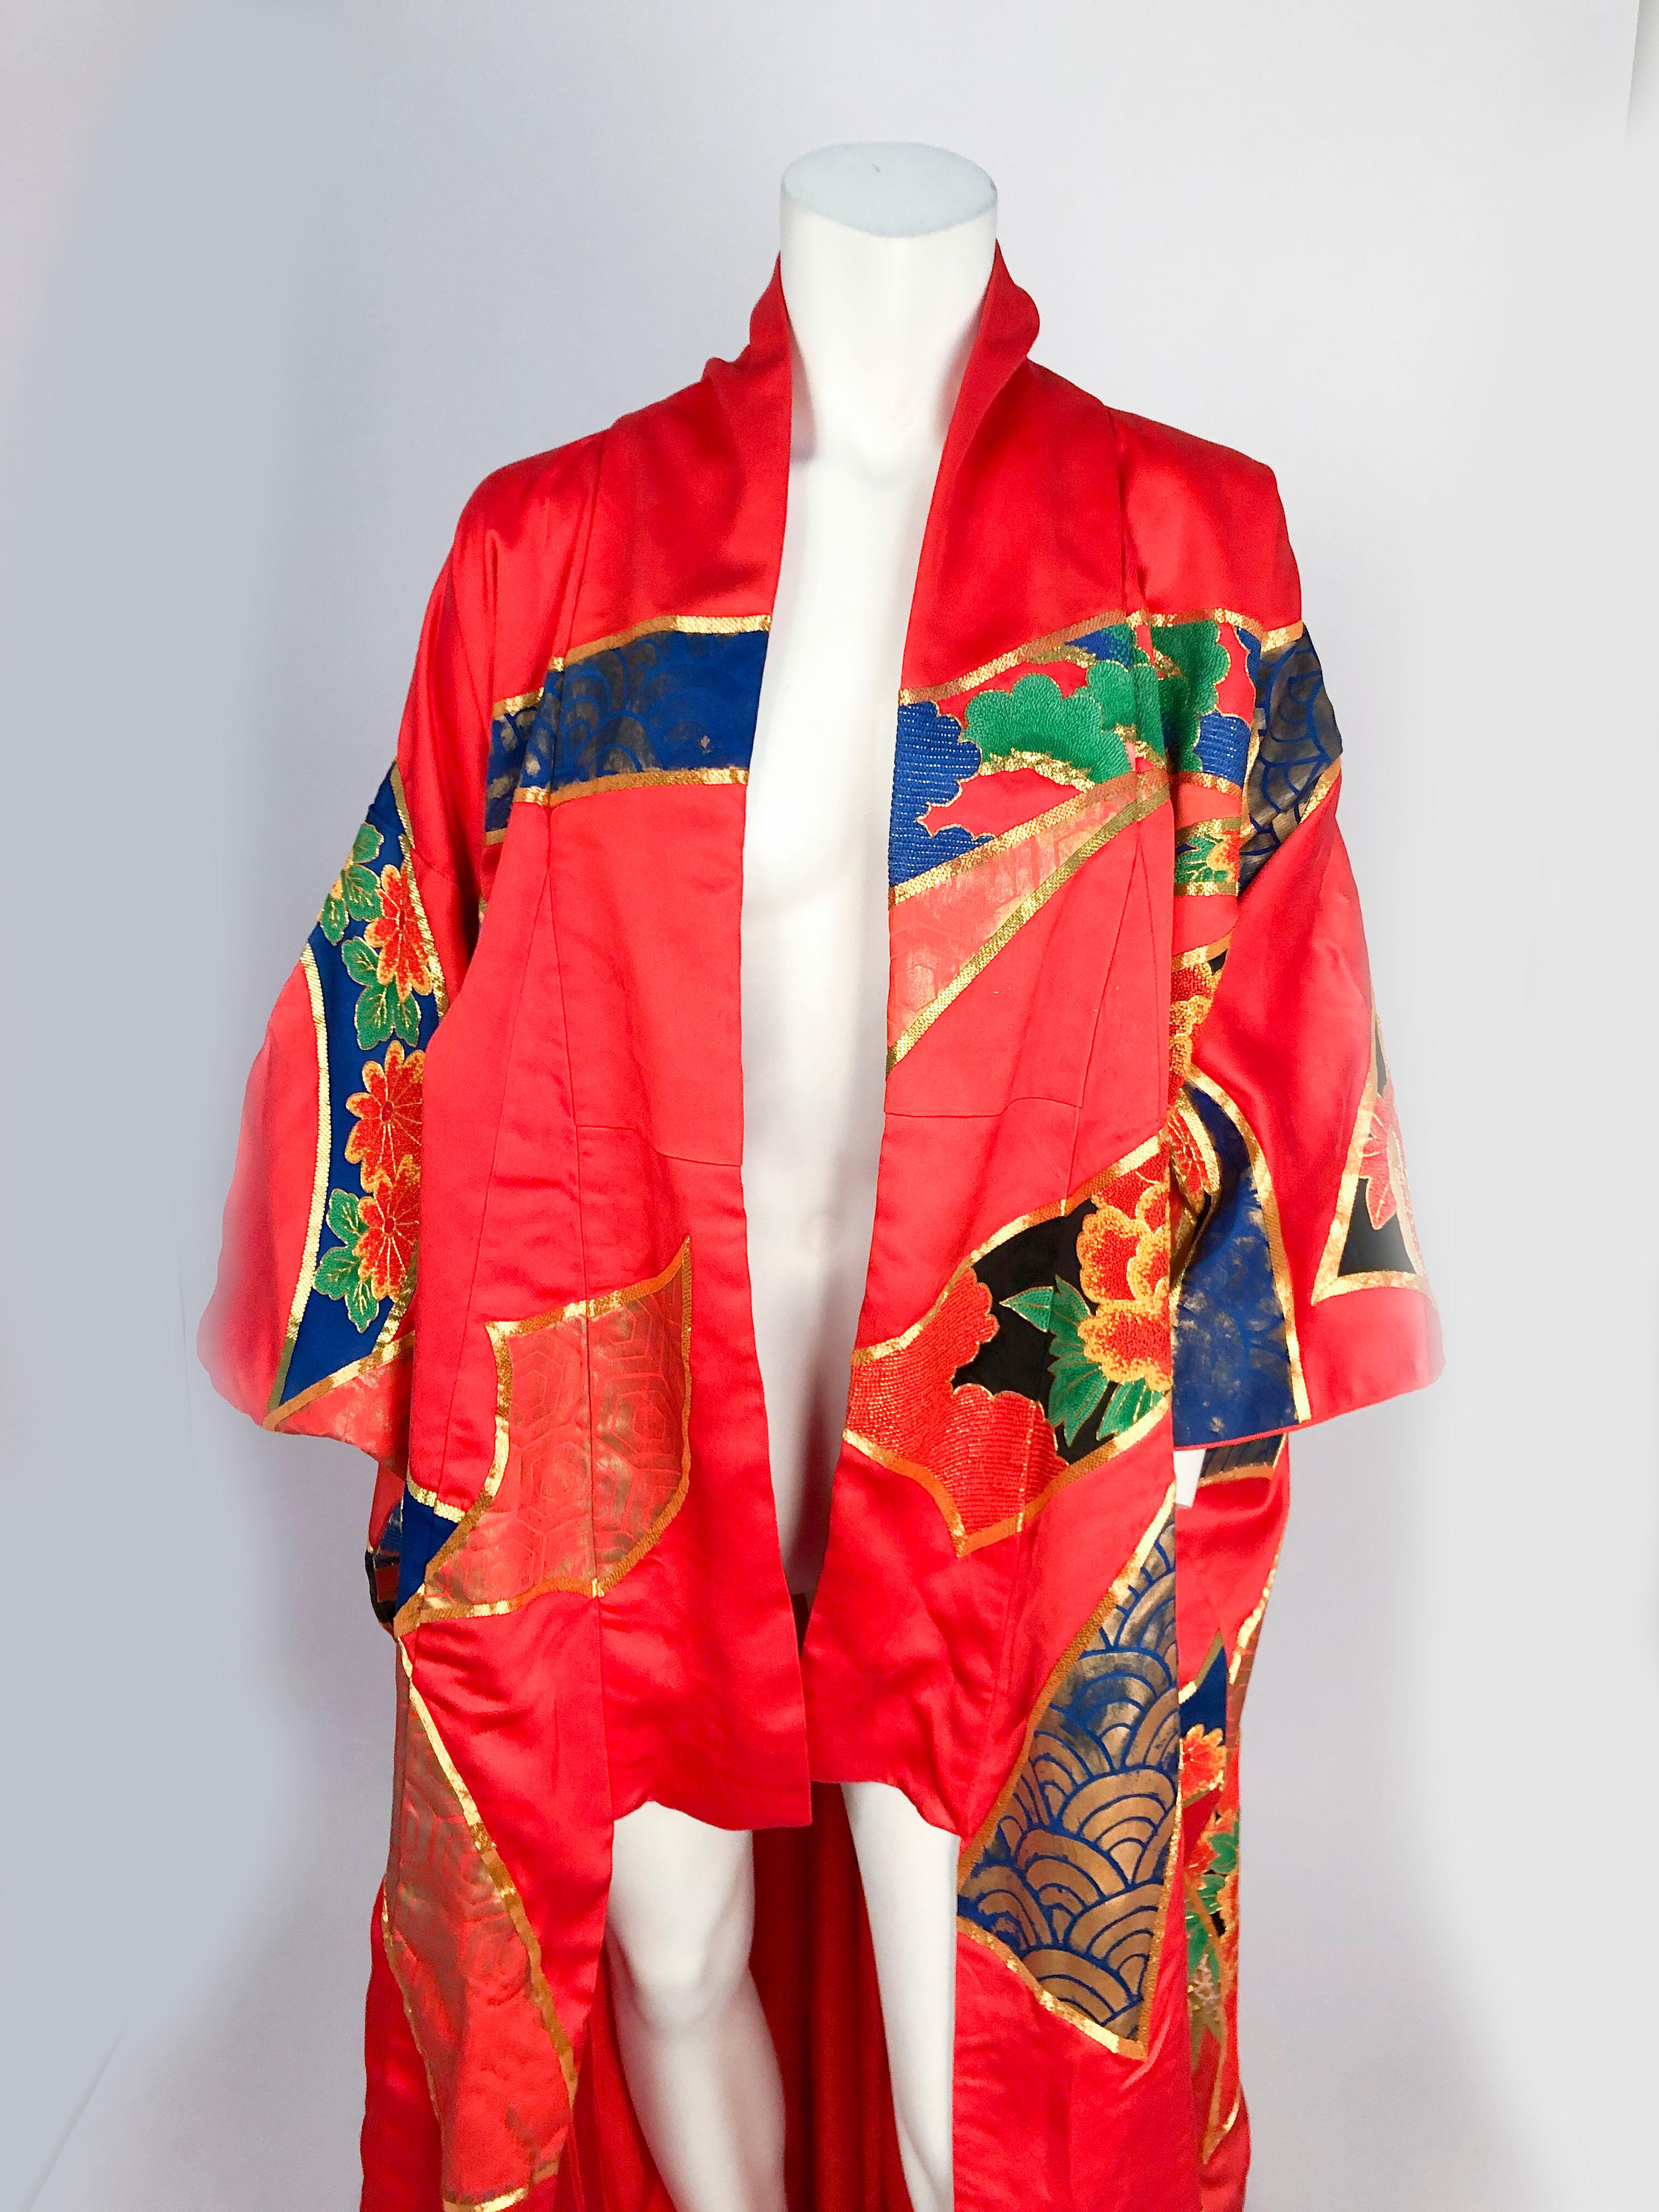 1980's Brilliant Orange Kimono Opera Coat with quilted hem that trains at the end, floral embroidery containing metallic threads, traditional Japanese long panelled sleeves, and gold stenciling.

This kimono has the following measurements:

Across